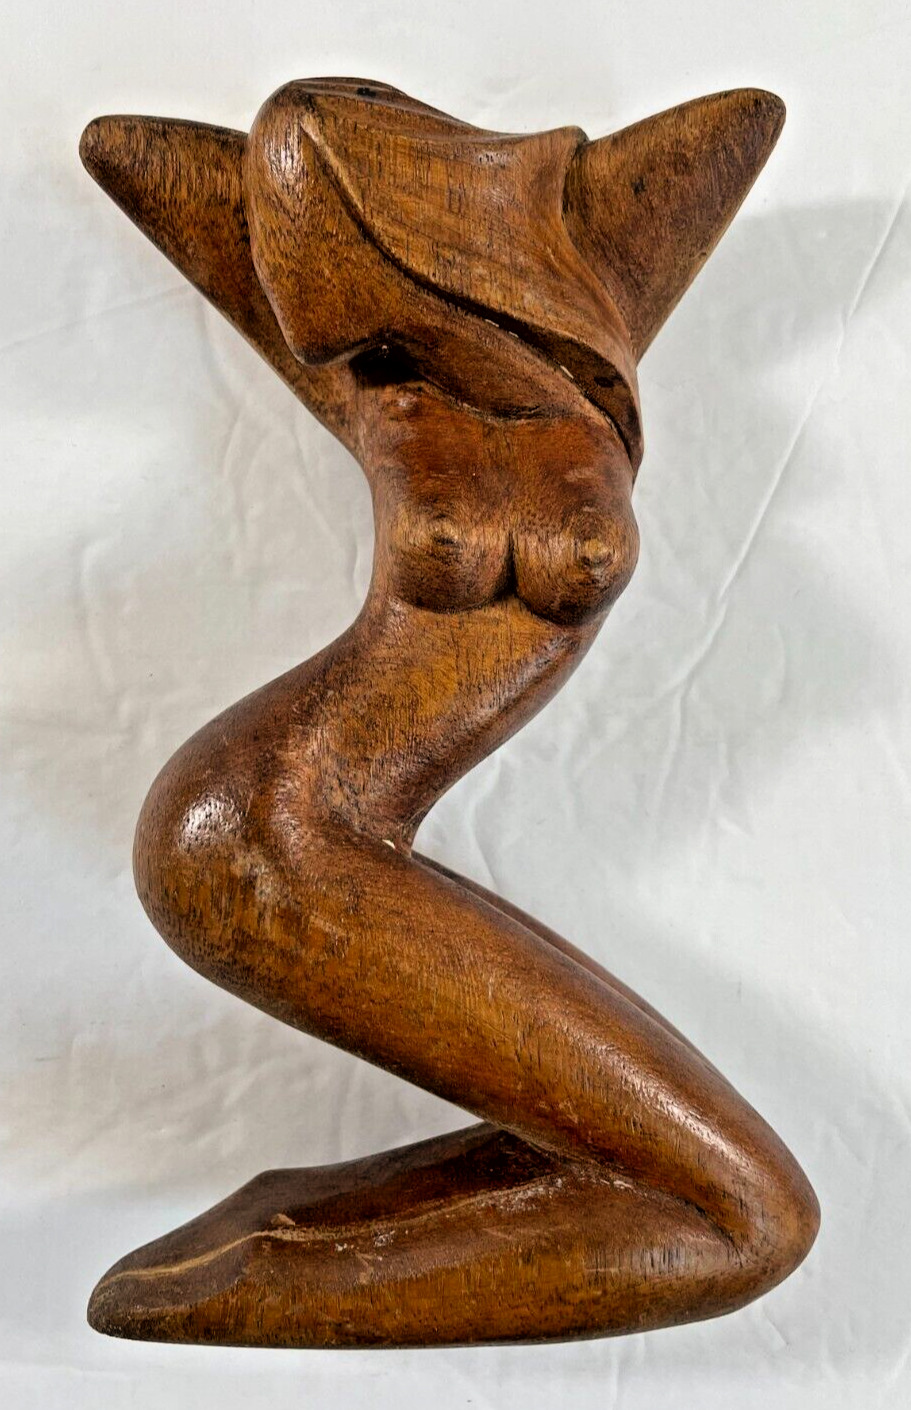 Vintage Carved Wood Nude Figurine - 8 inches tall